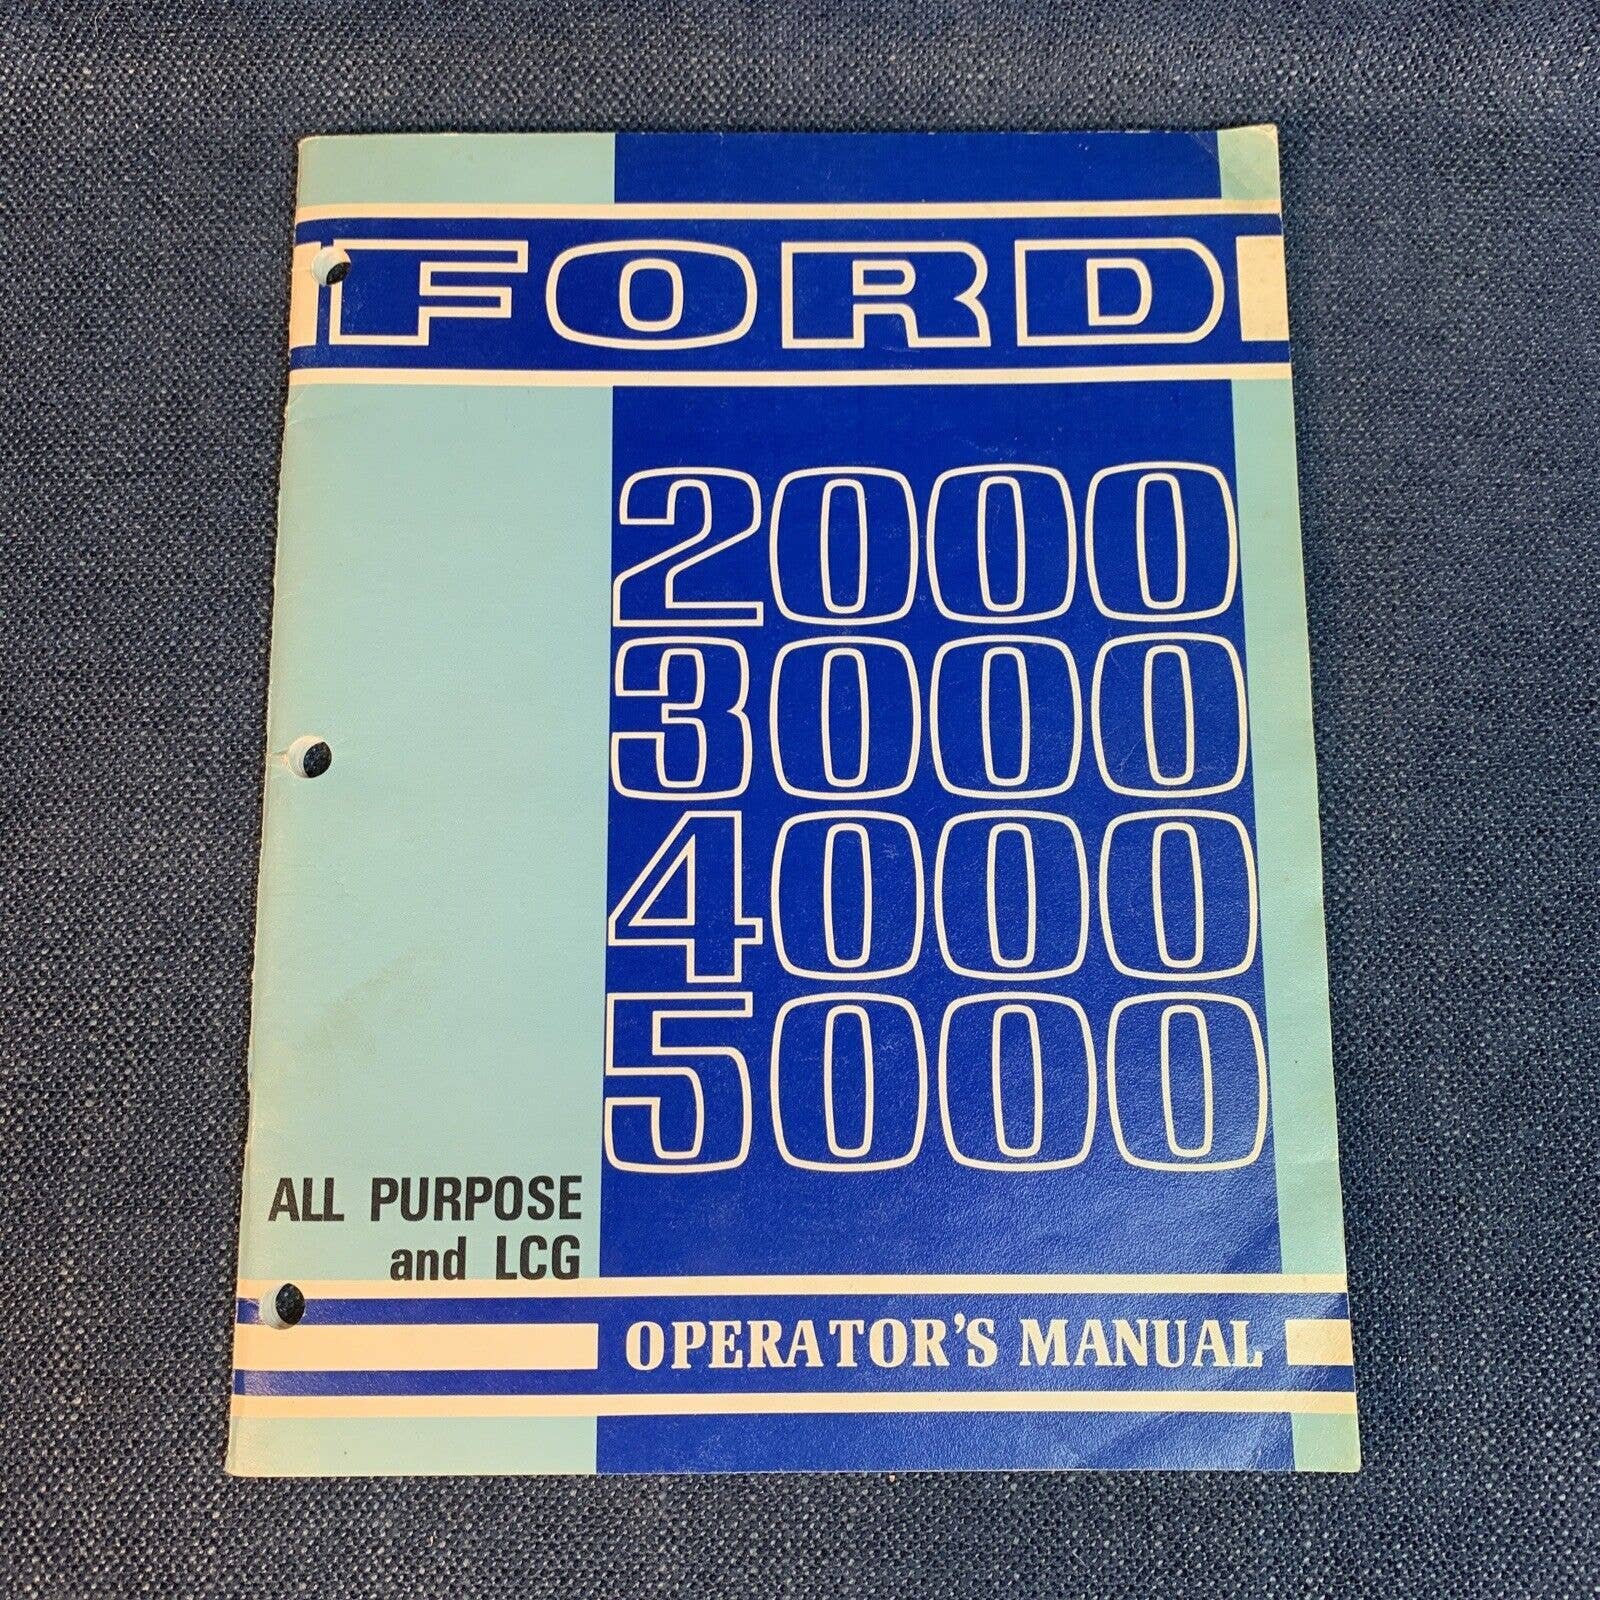 FORD TRACTOR 2000/3000/4000/5000 all purpose And LCG operator´s manual 1963 5OMOXtaTJ